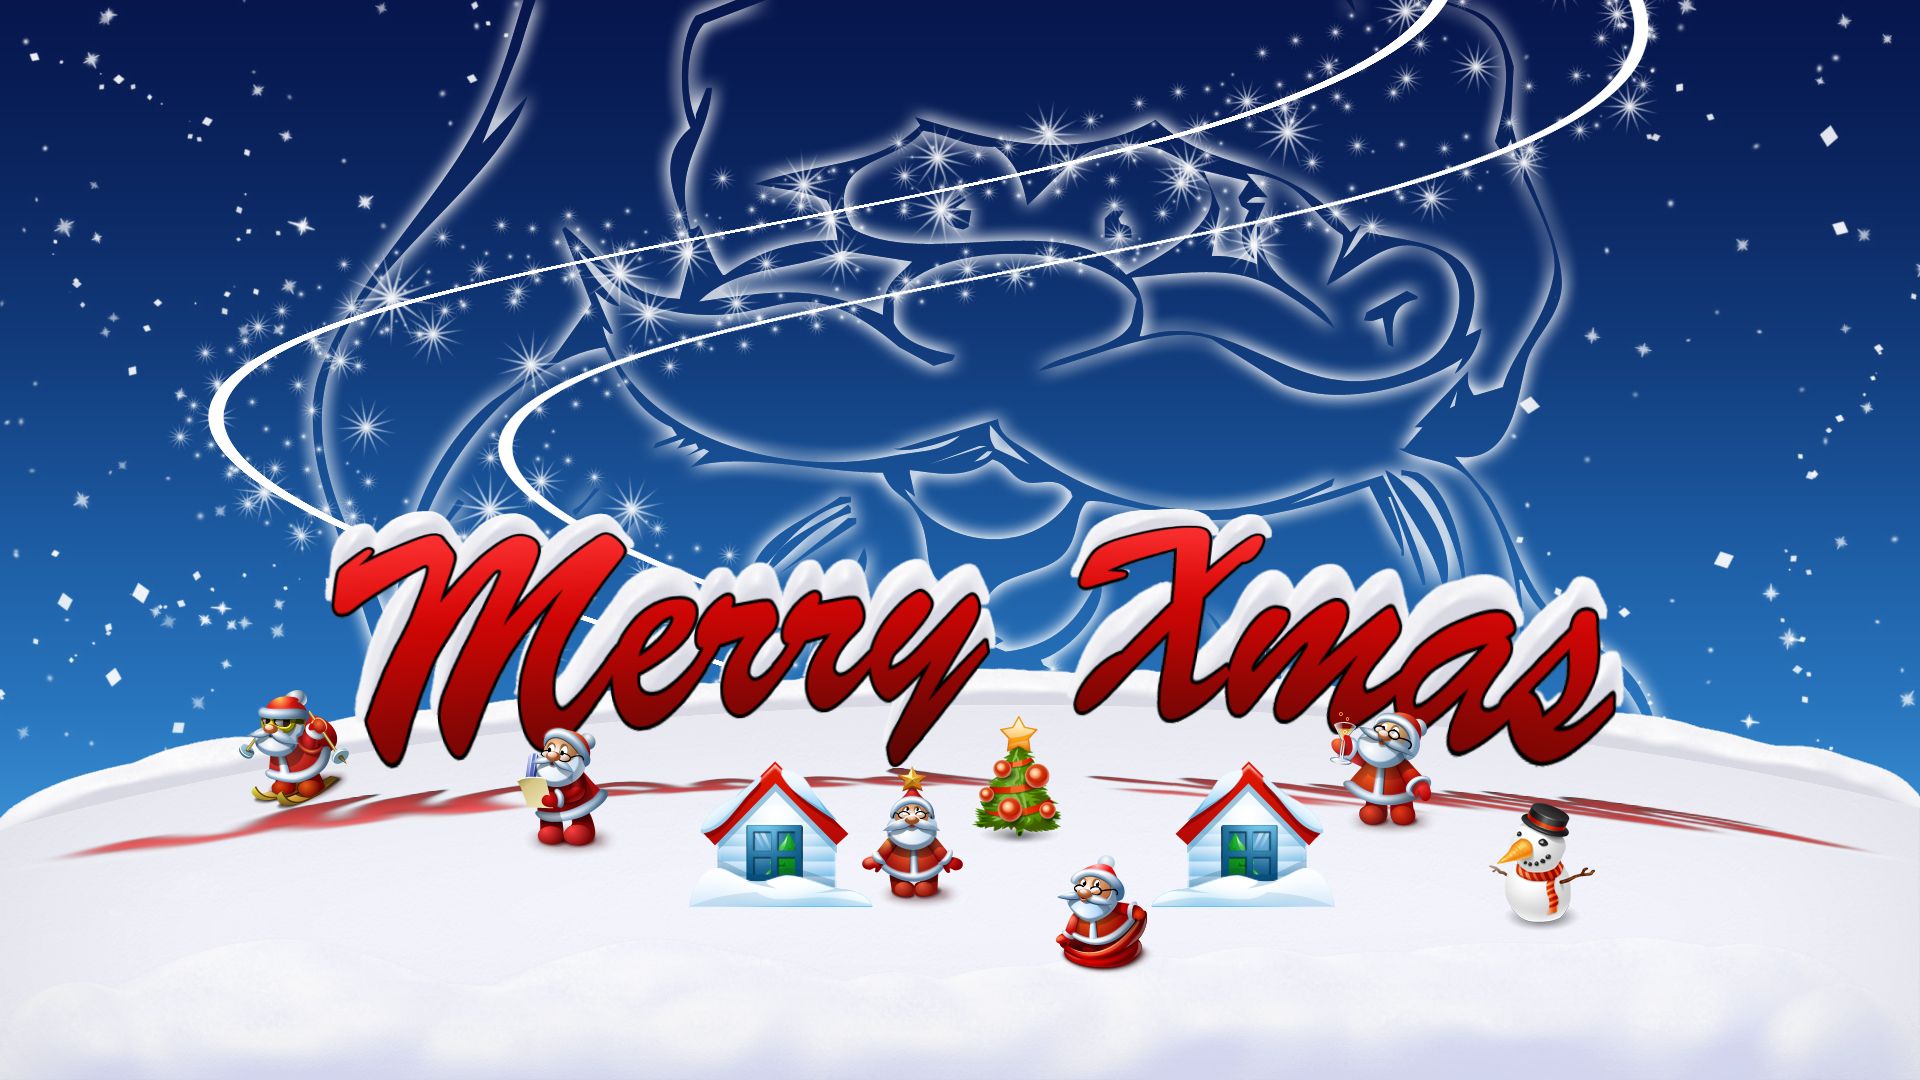 Merry 'X'mas Wallpapers Free Download - Merry Christmas 2015